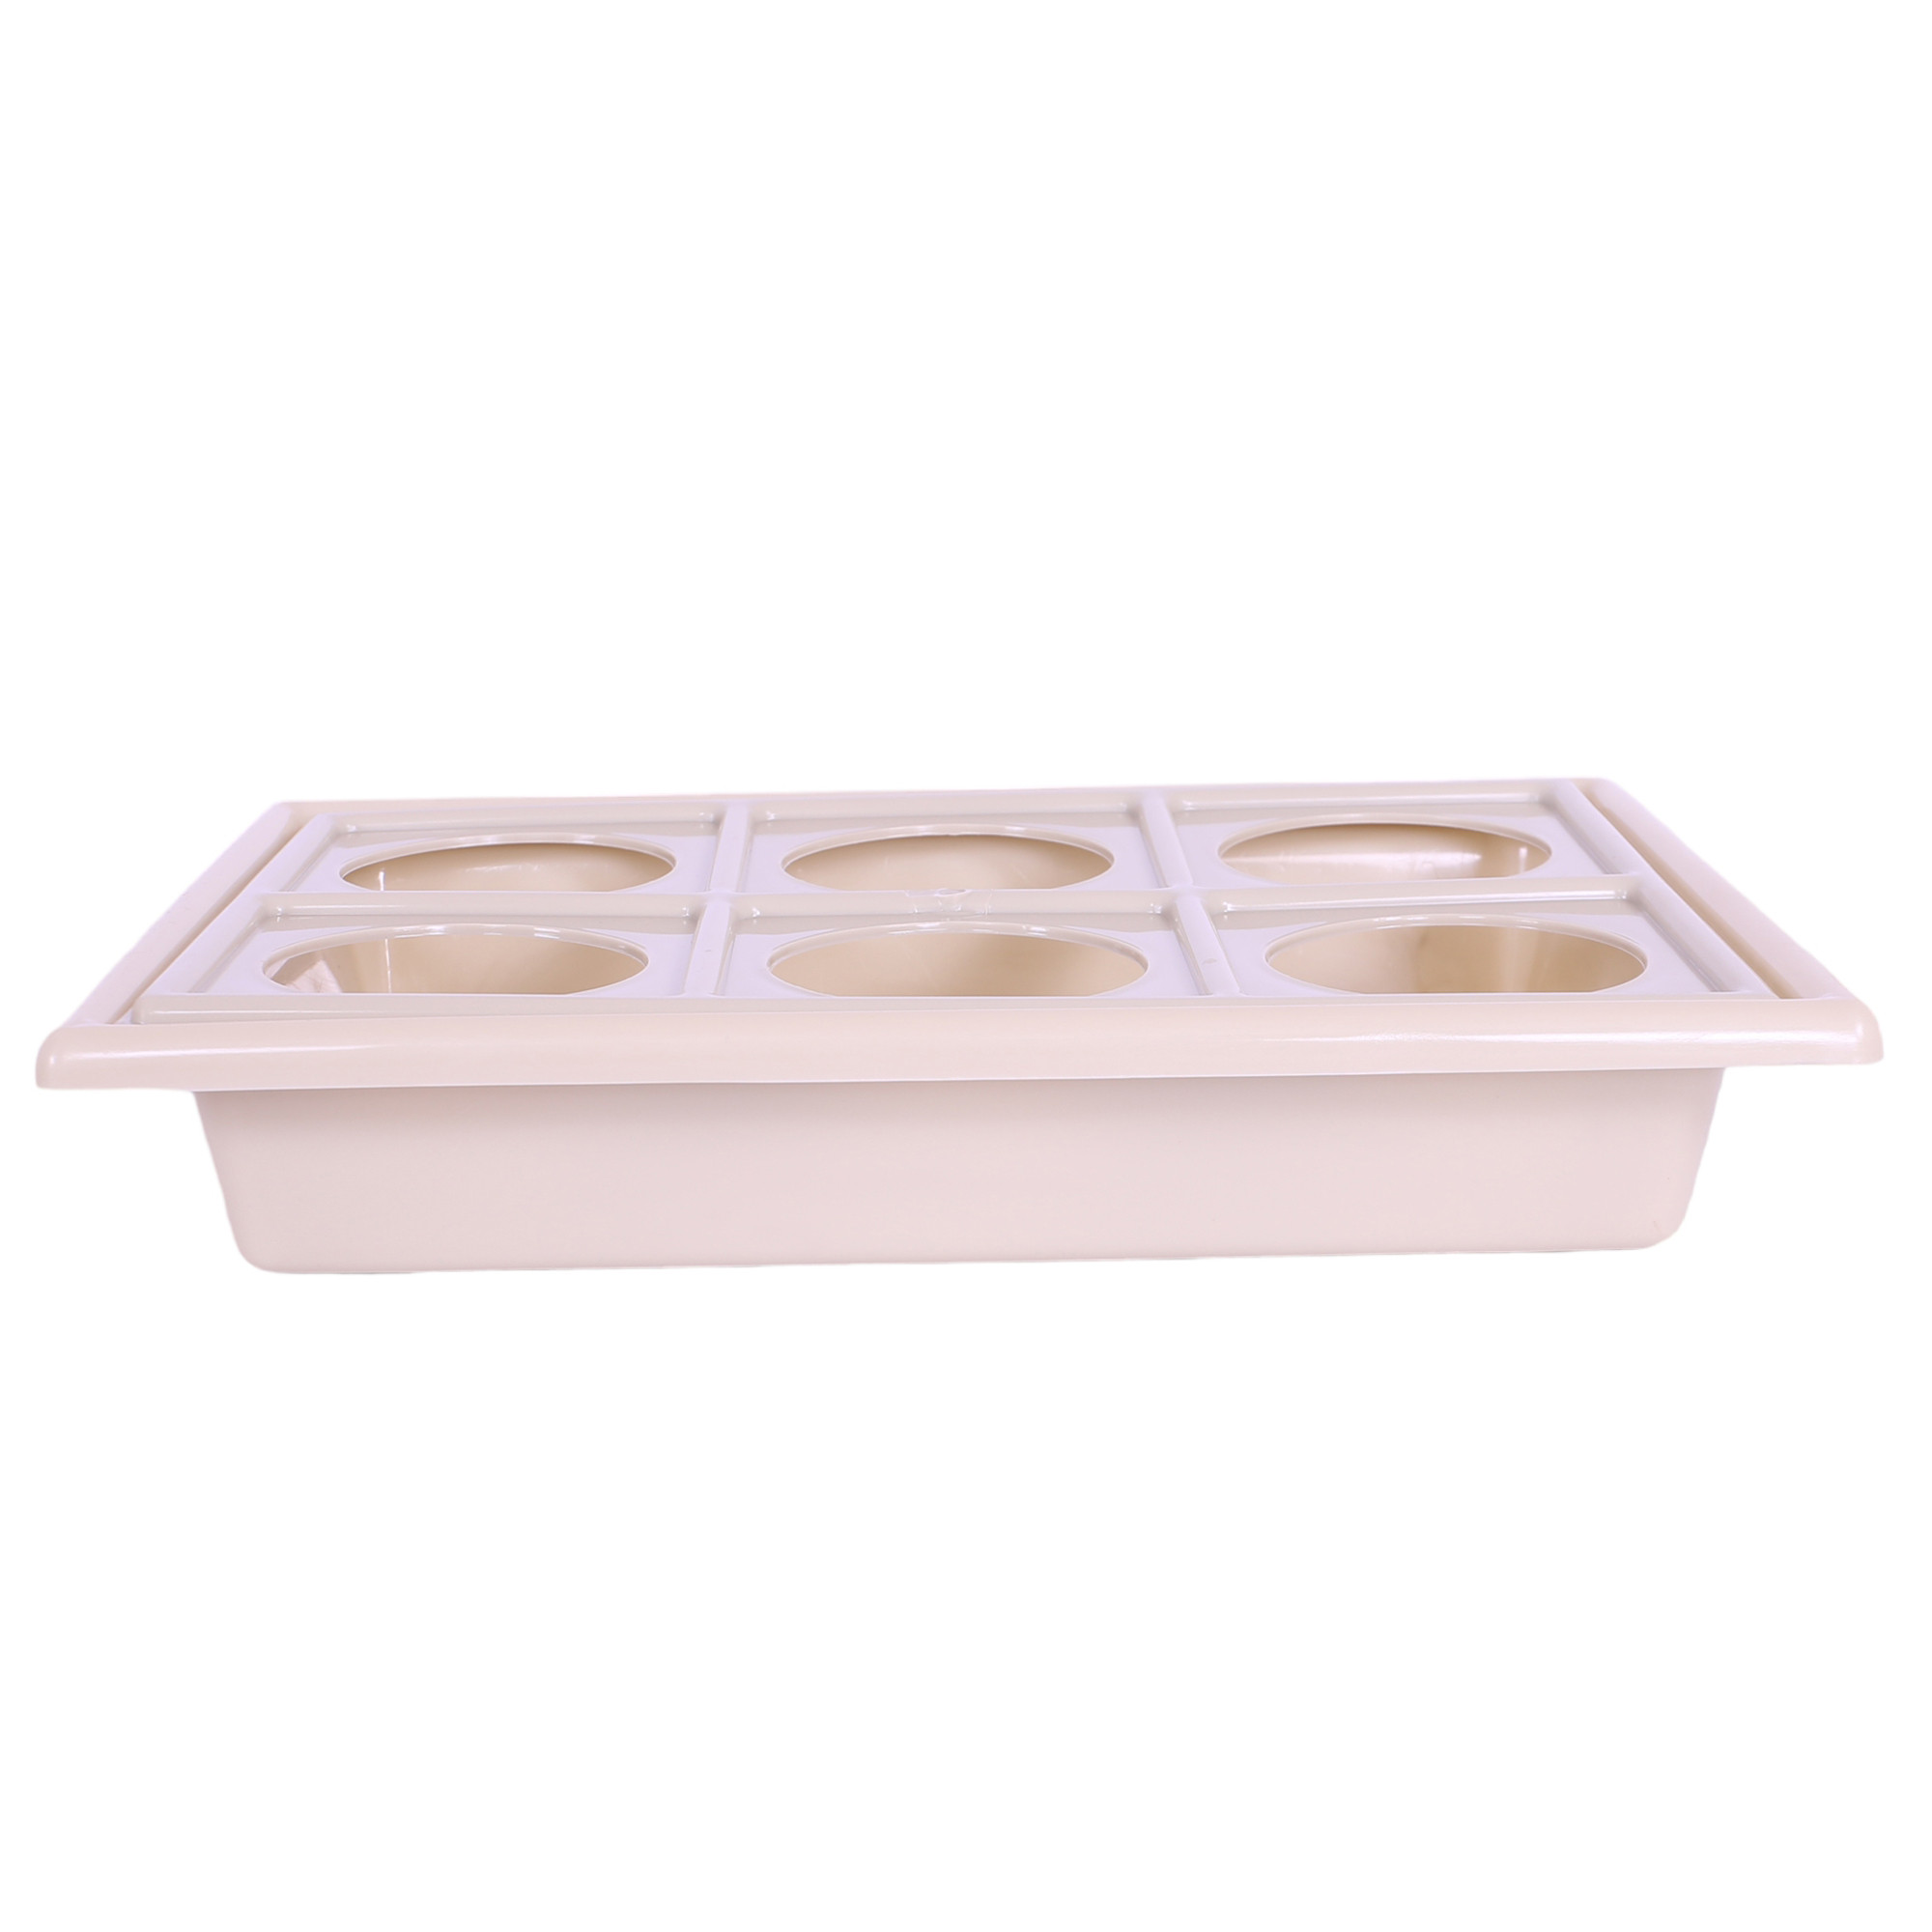 Kuber Industries Glass Tray | Plastic Glass Holder | Tray with Cutout Handles | Glass Serving Tray | Glass Holder Tray for Seving | Kitchen Serving Tray | Beige